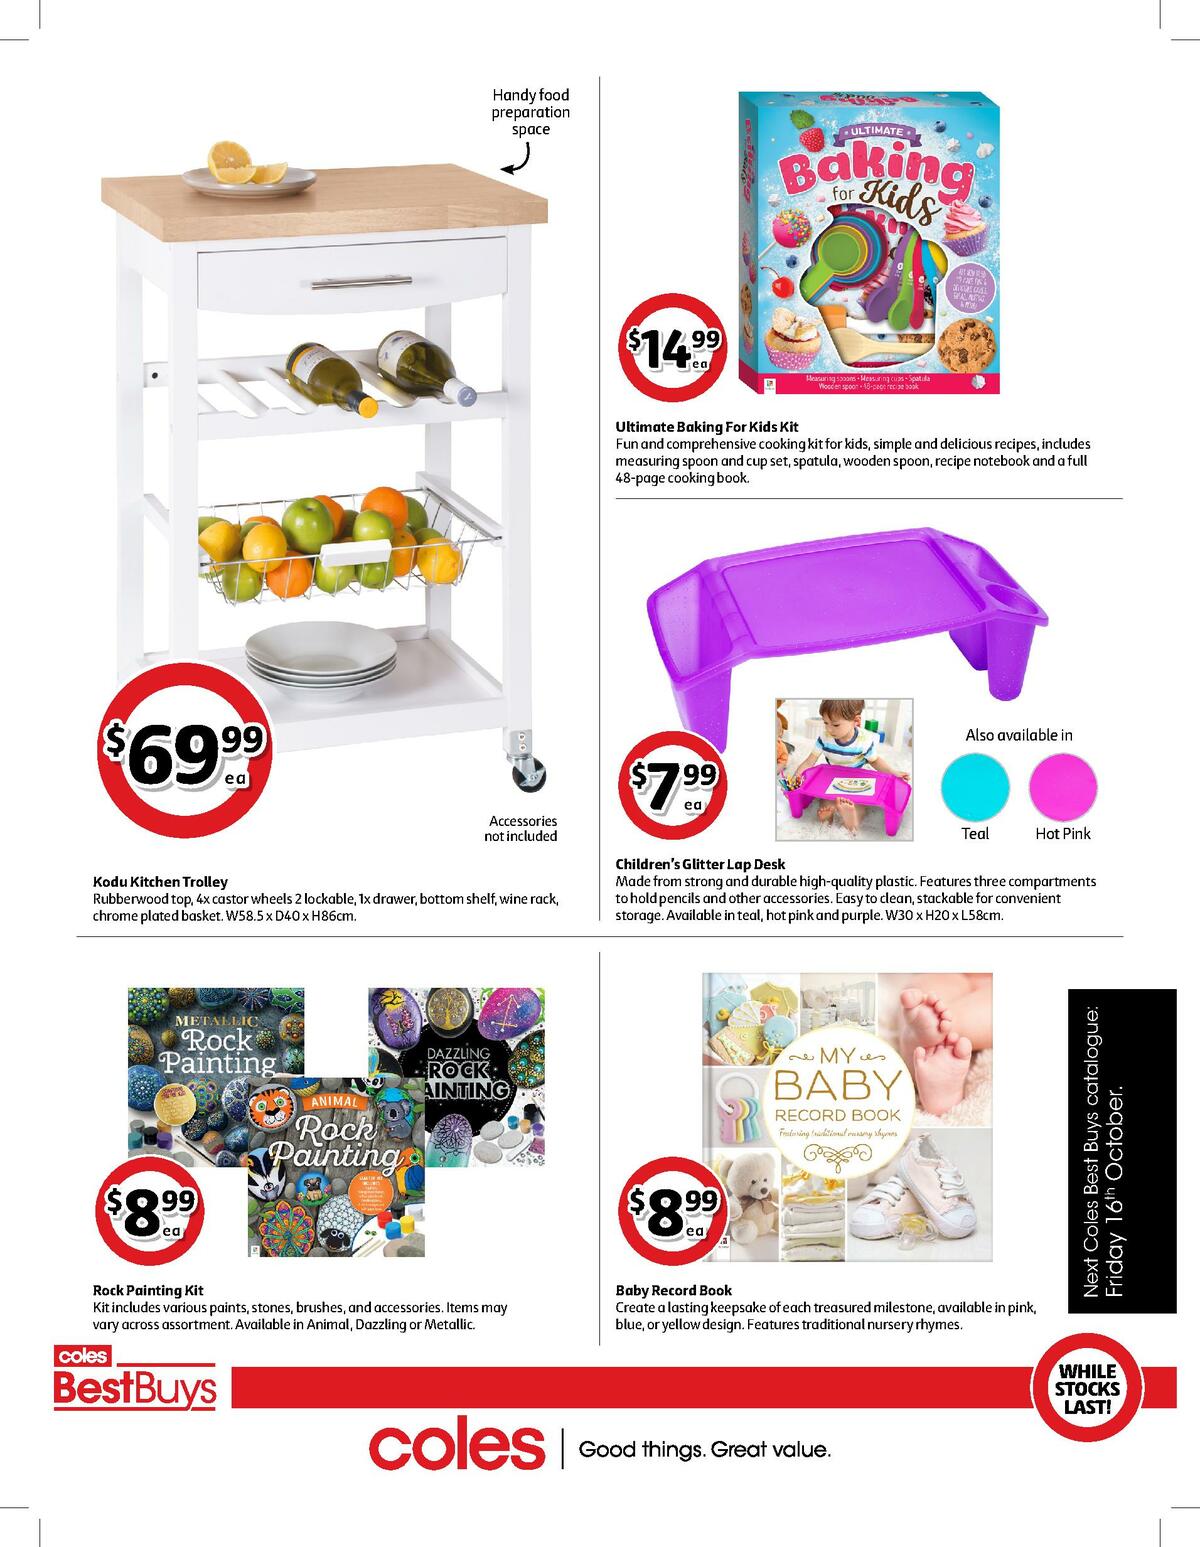 Coles Best Buys Catalogues from 2 October